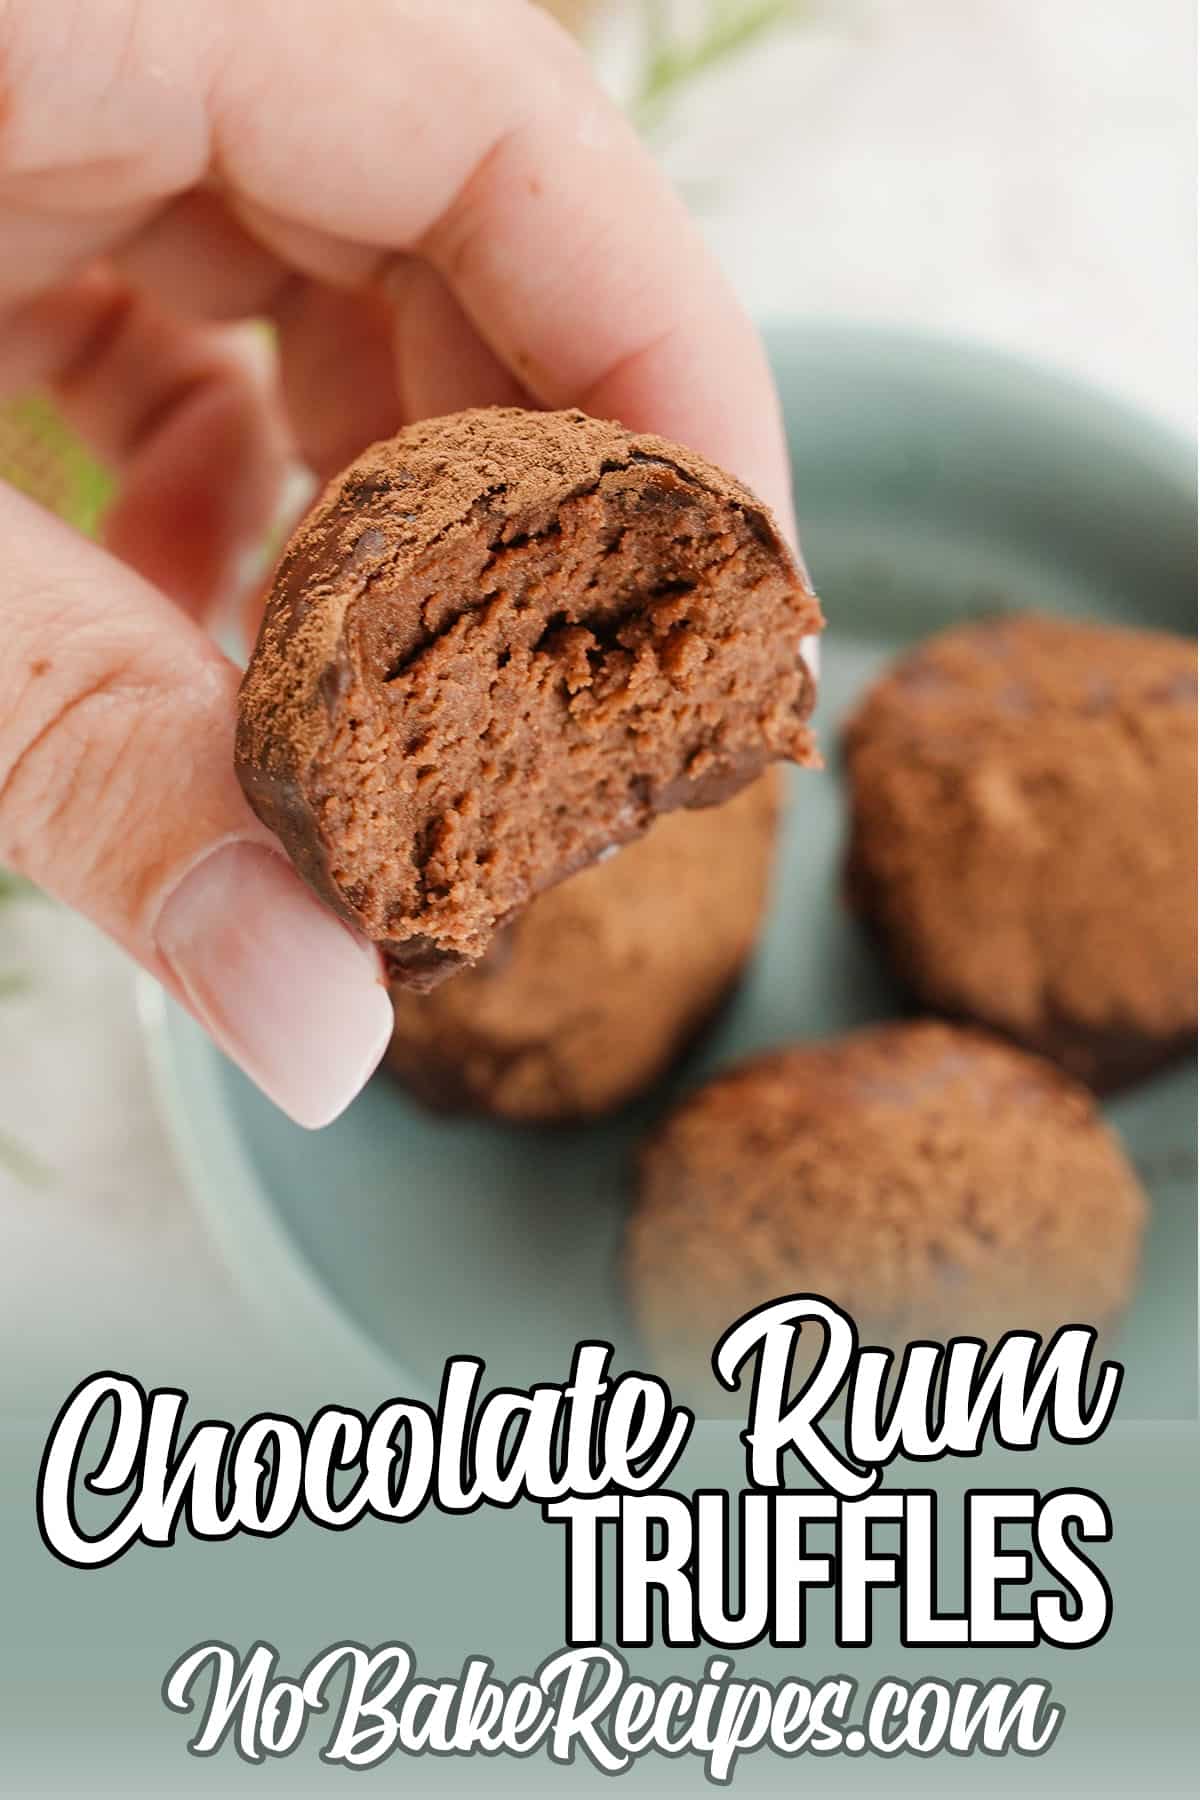 rum ball bitten in half held in between two fingers with text which reads chocolate rum truffles